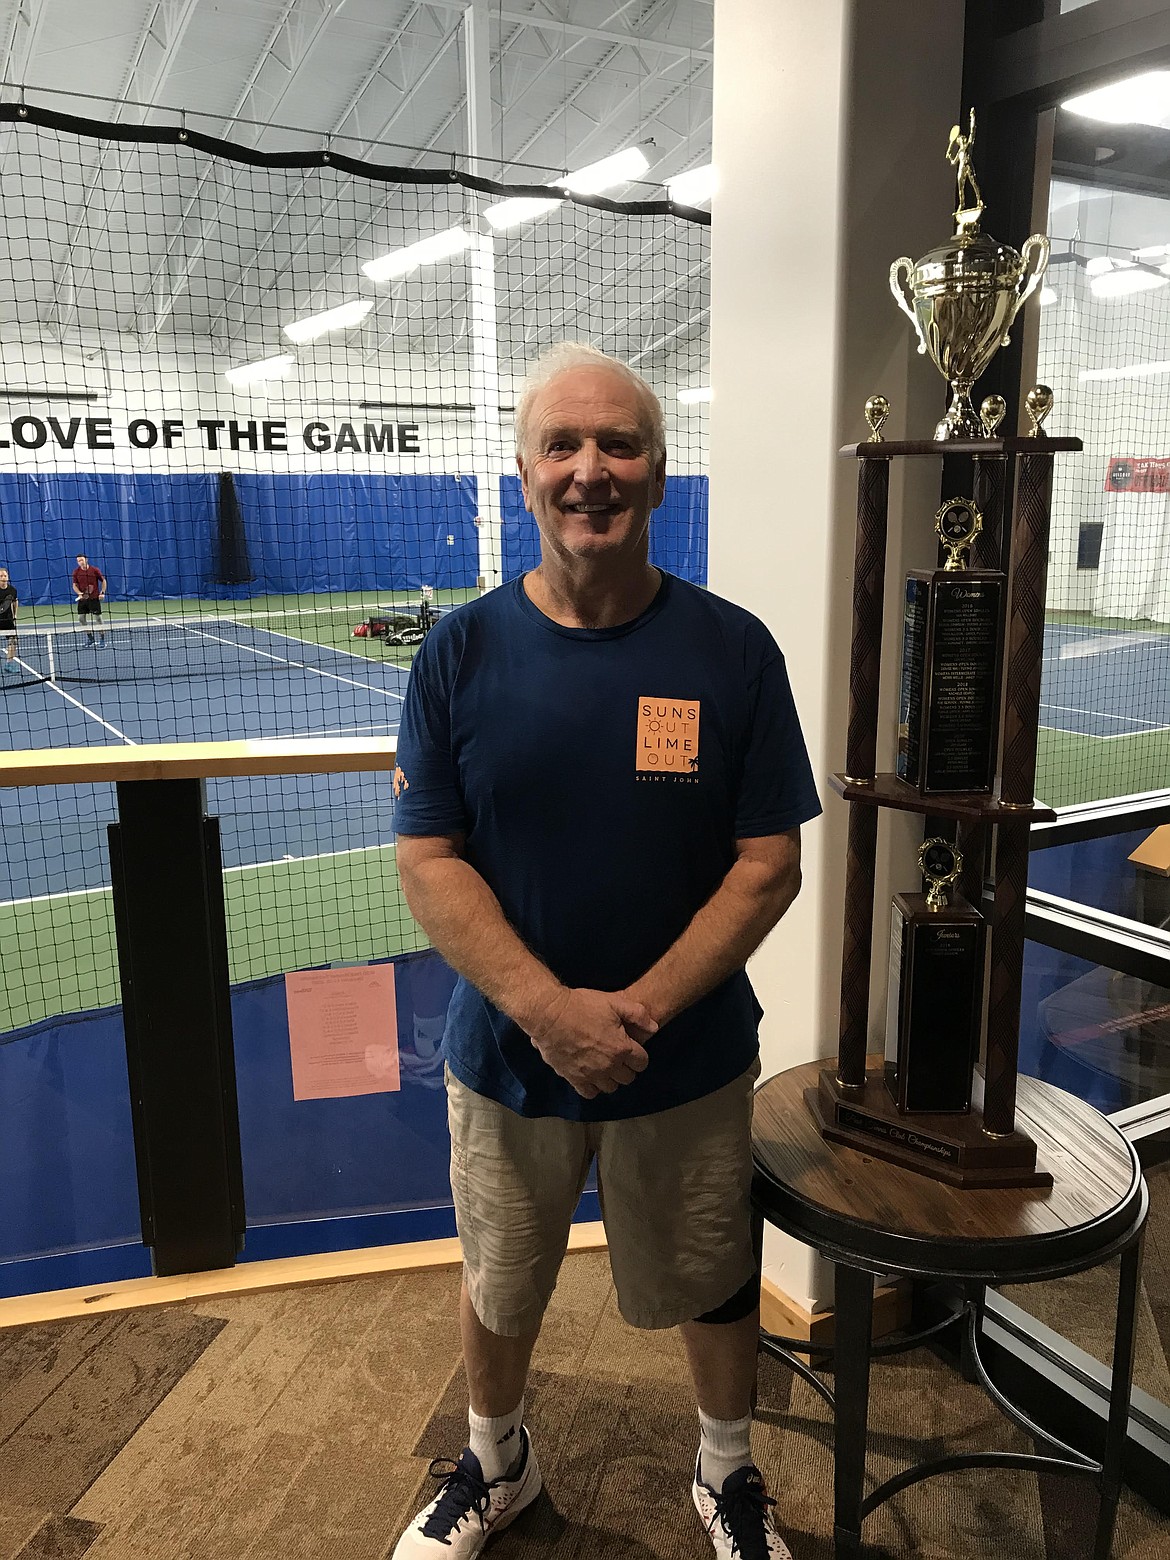 Courtesy photo
Dean Hendricks won the men's 4.0 singles title at the Peak Hayden Member Club Tennis Tournament recently at Peak Health and Wellness in Hayden. Dave Roth was the other finalist.